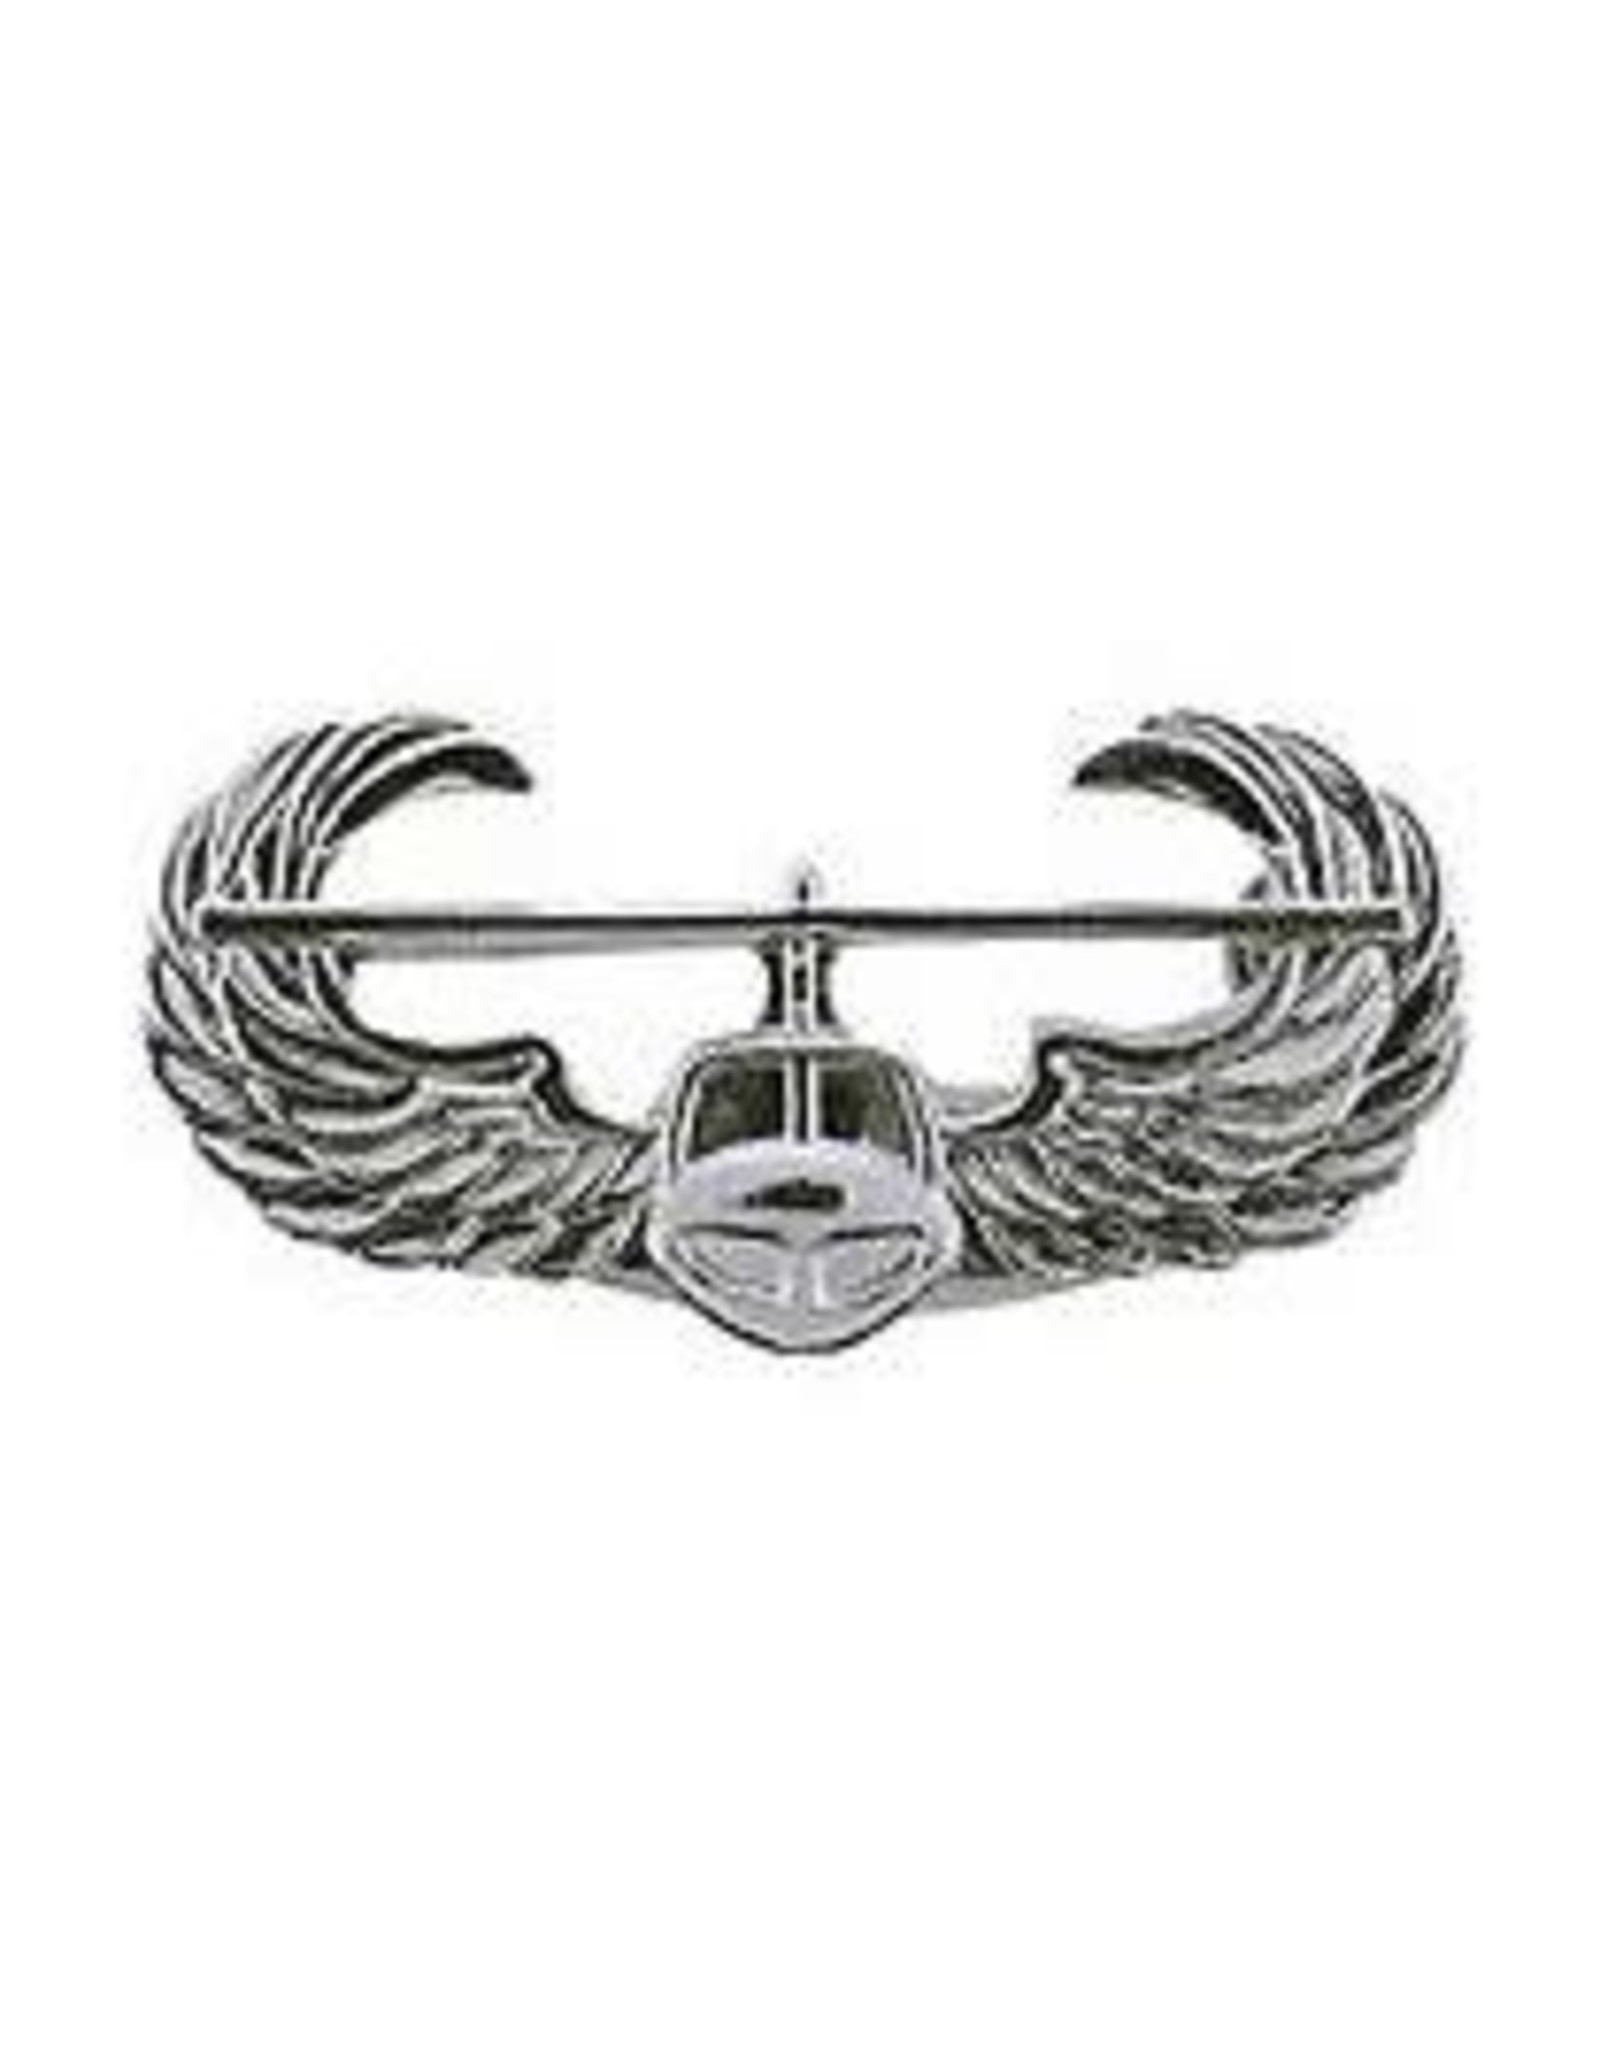 Pin - Wing - Army Air Assault Nickle